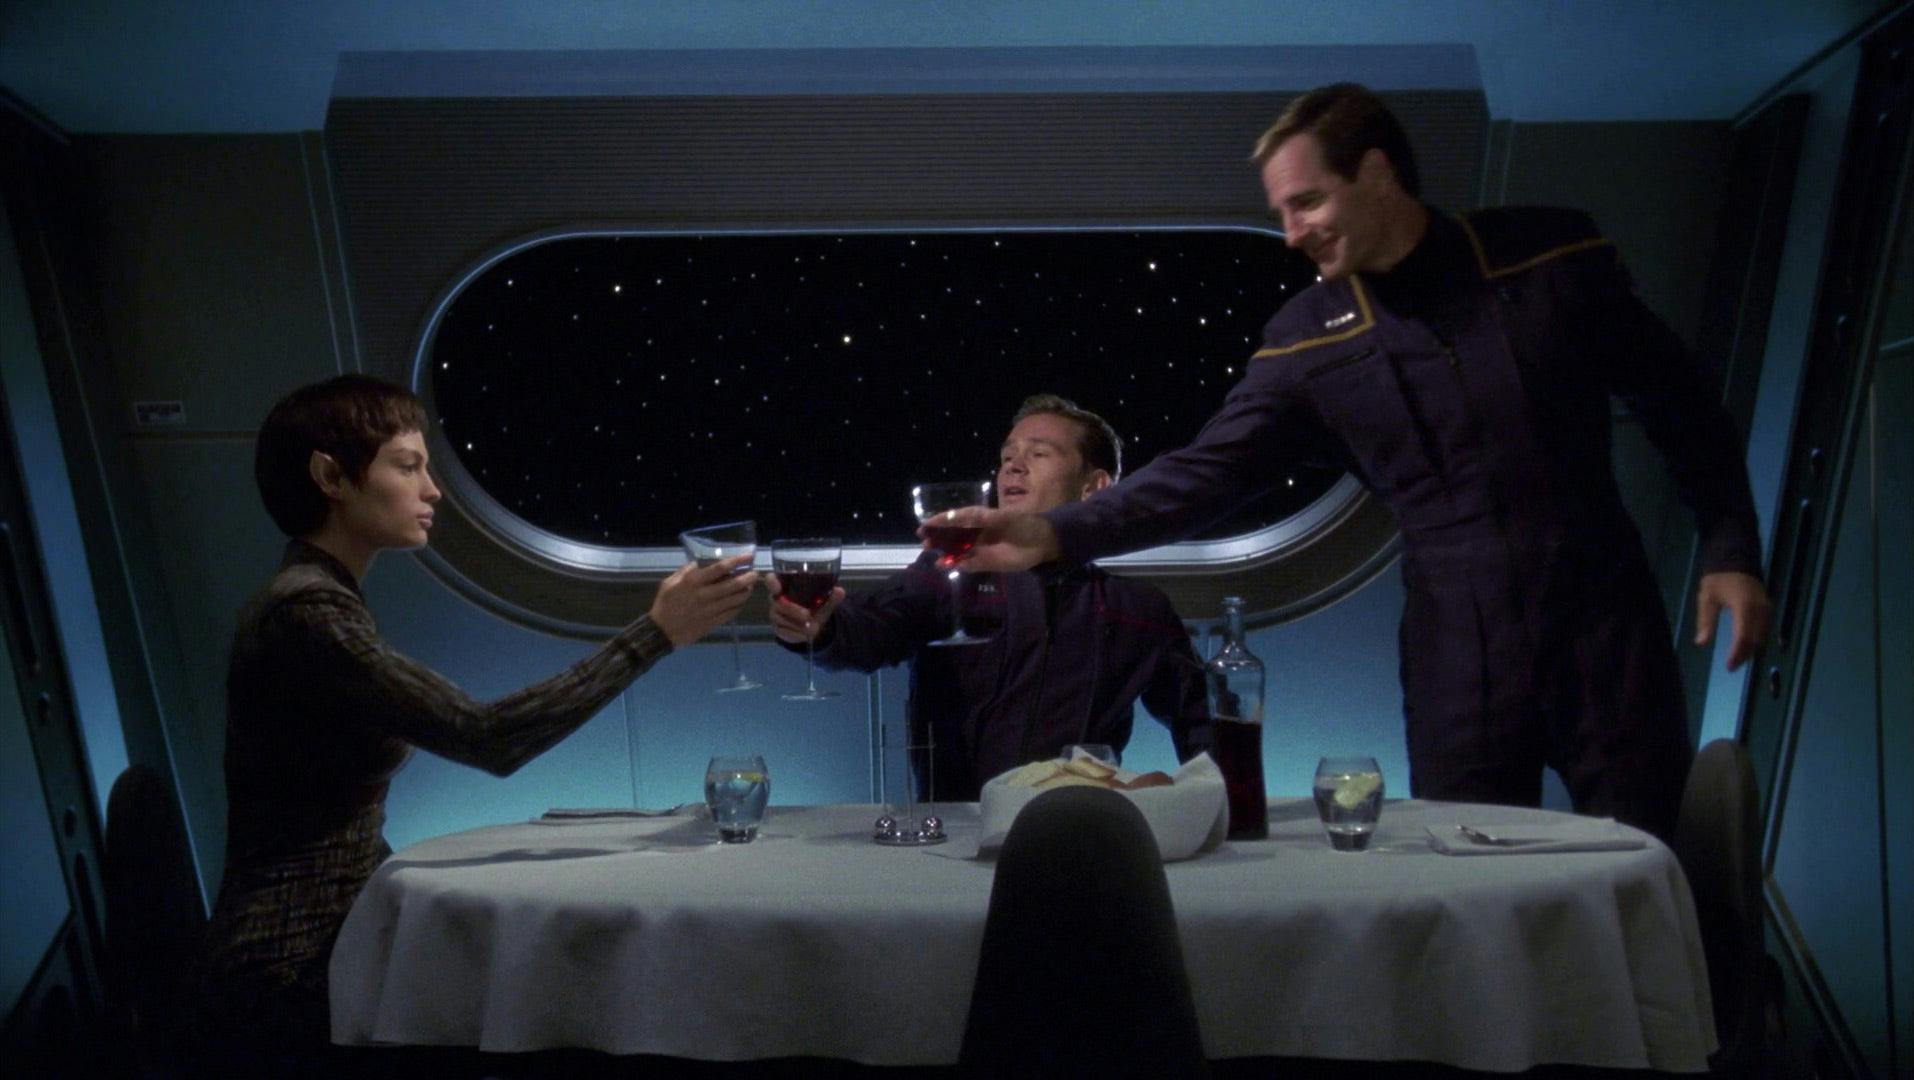 T'Pol raises her glass of wine with Trip and Archer